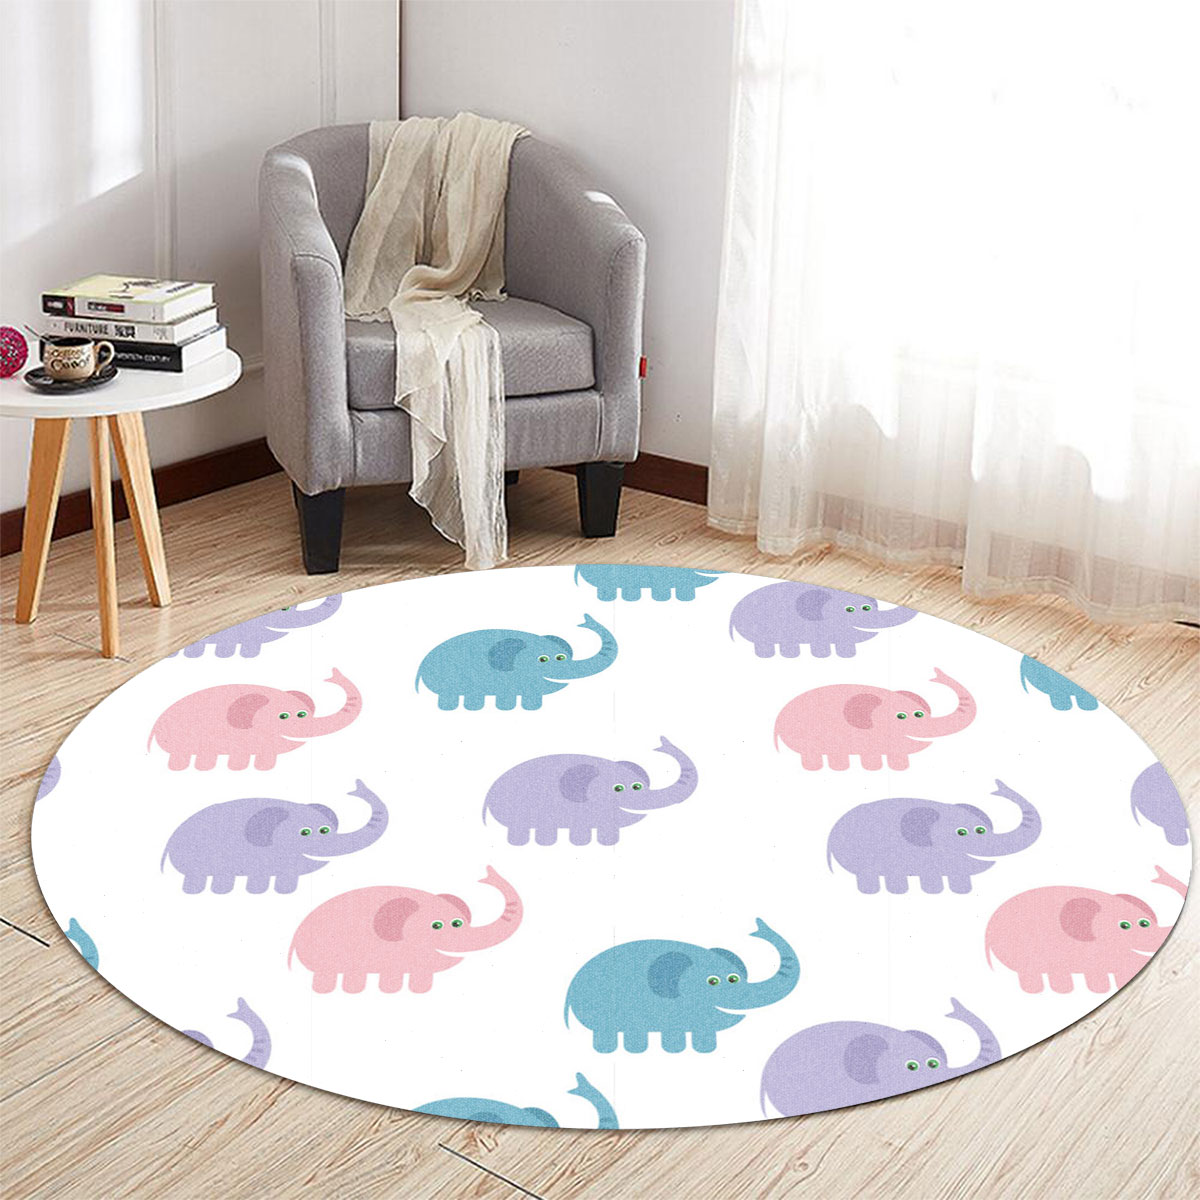 Big Colorful African Elephant Round Carpet 6